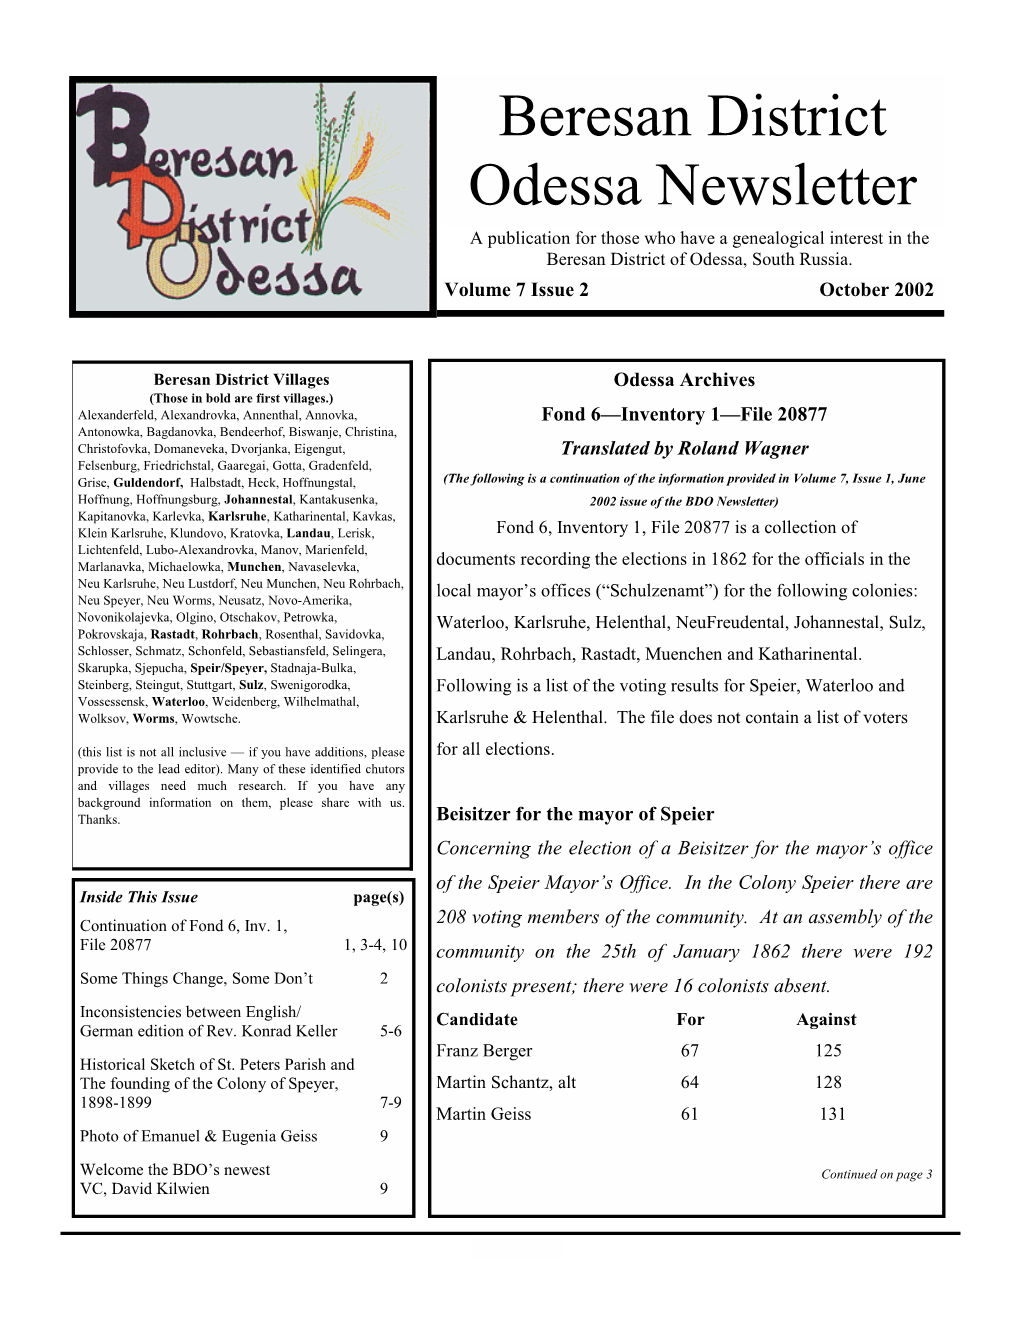 Beresan District Odessa Newsletter a Publication for Those Who Have a Genealogical Interest in the Beresan District of Odessa, South Russia